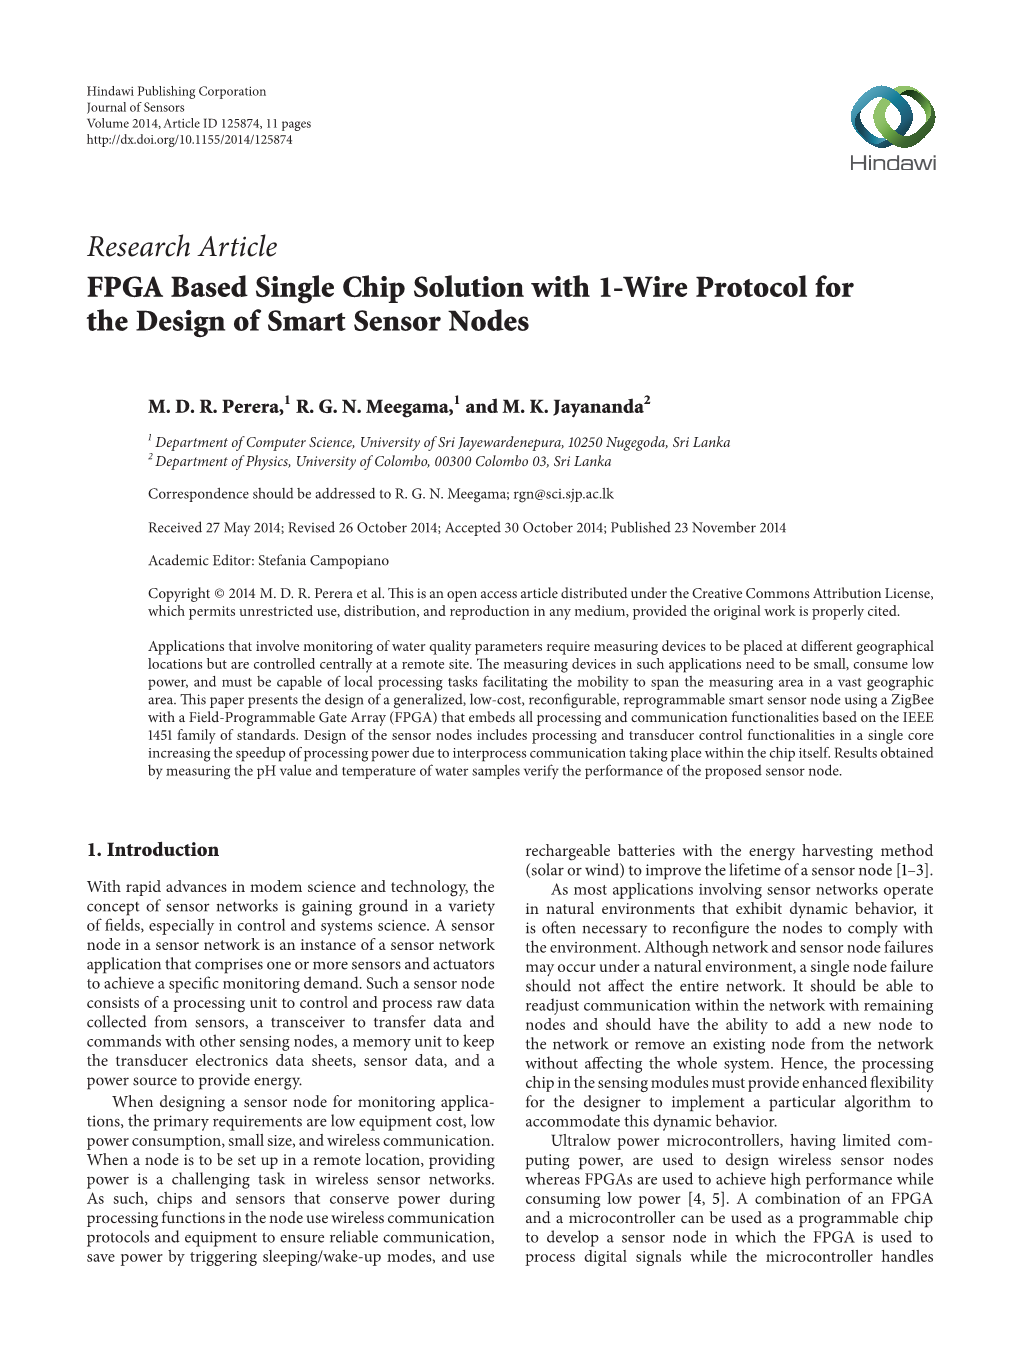 FPGA Based Single Chip Solution with 1-Wire Protocol for the Design of Smart Sensor Nodes